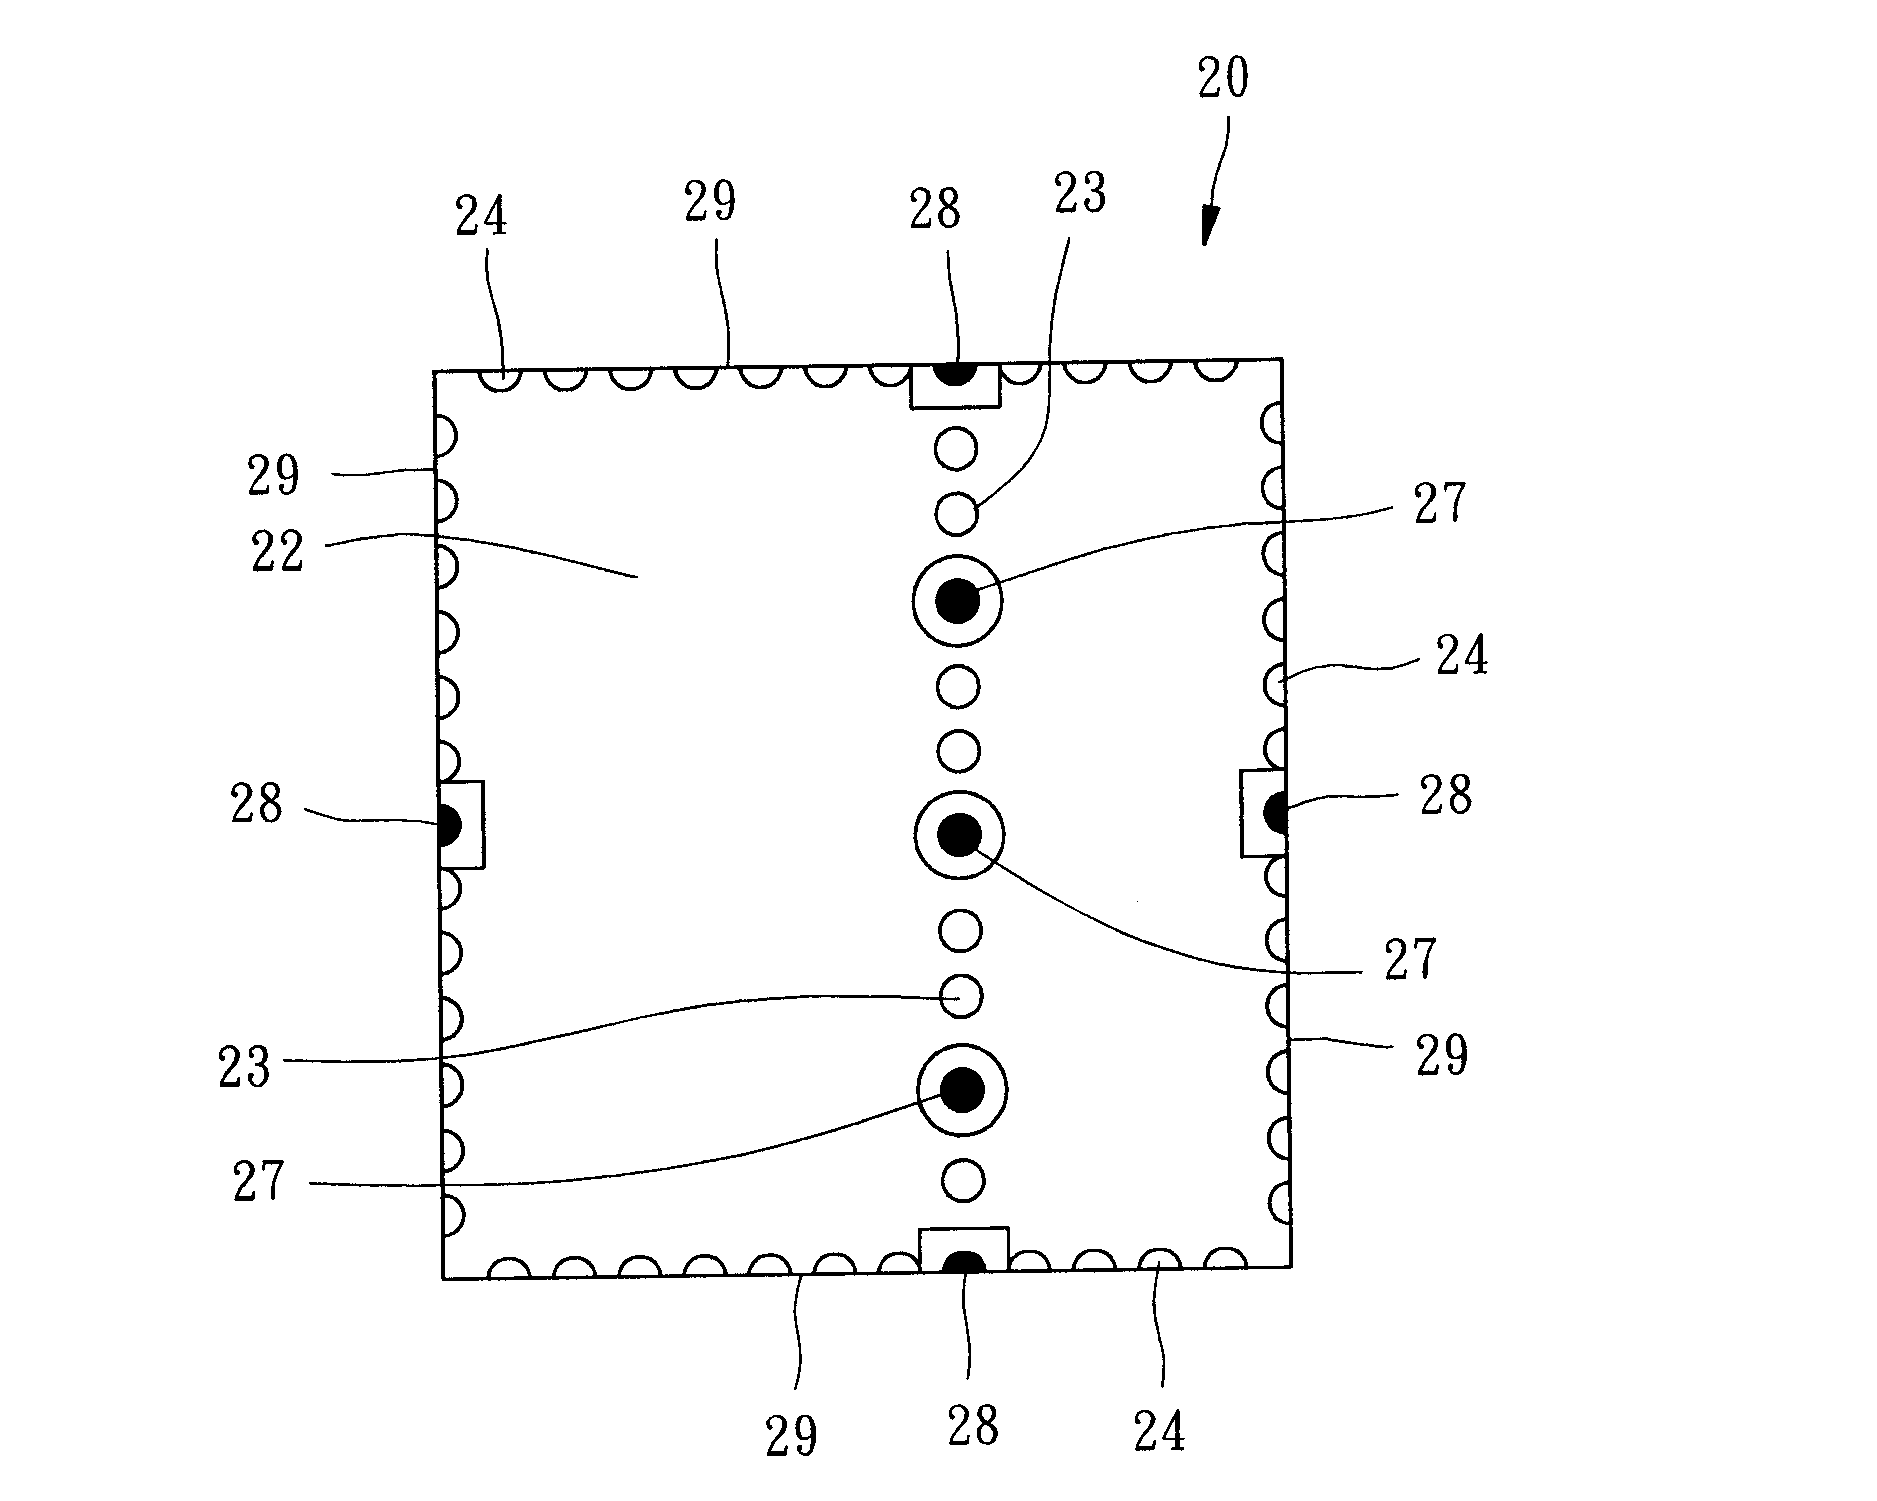 Conformal mask packaging structure and detection method